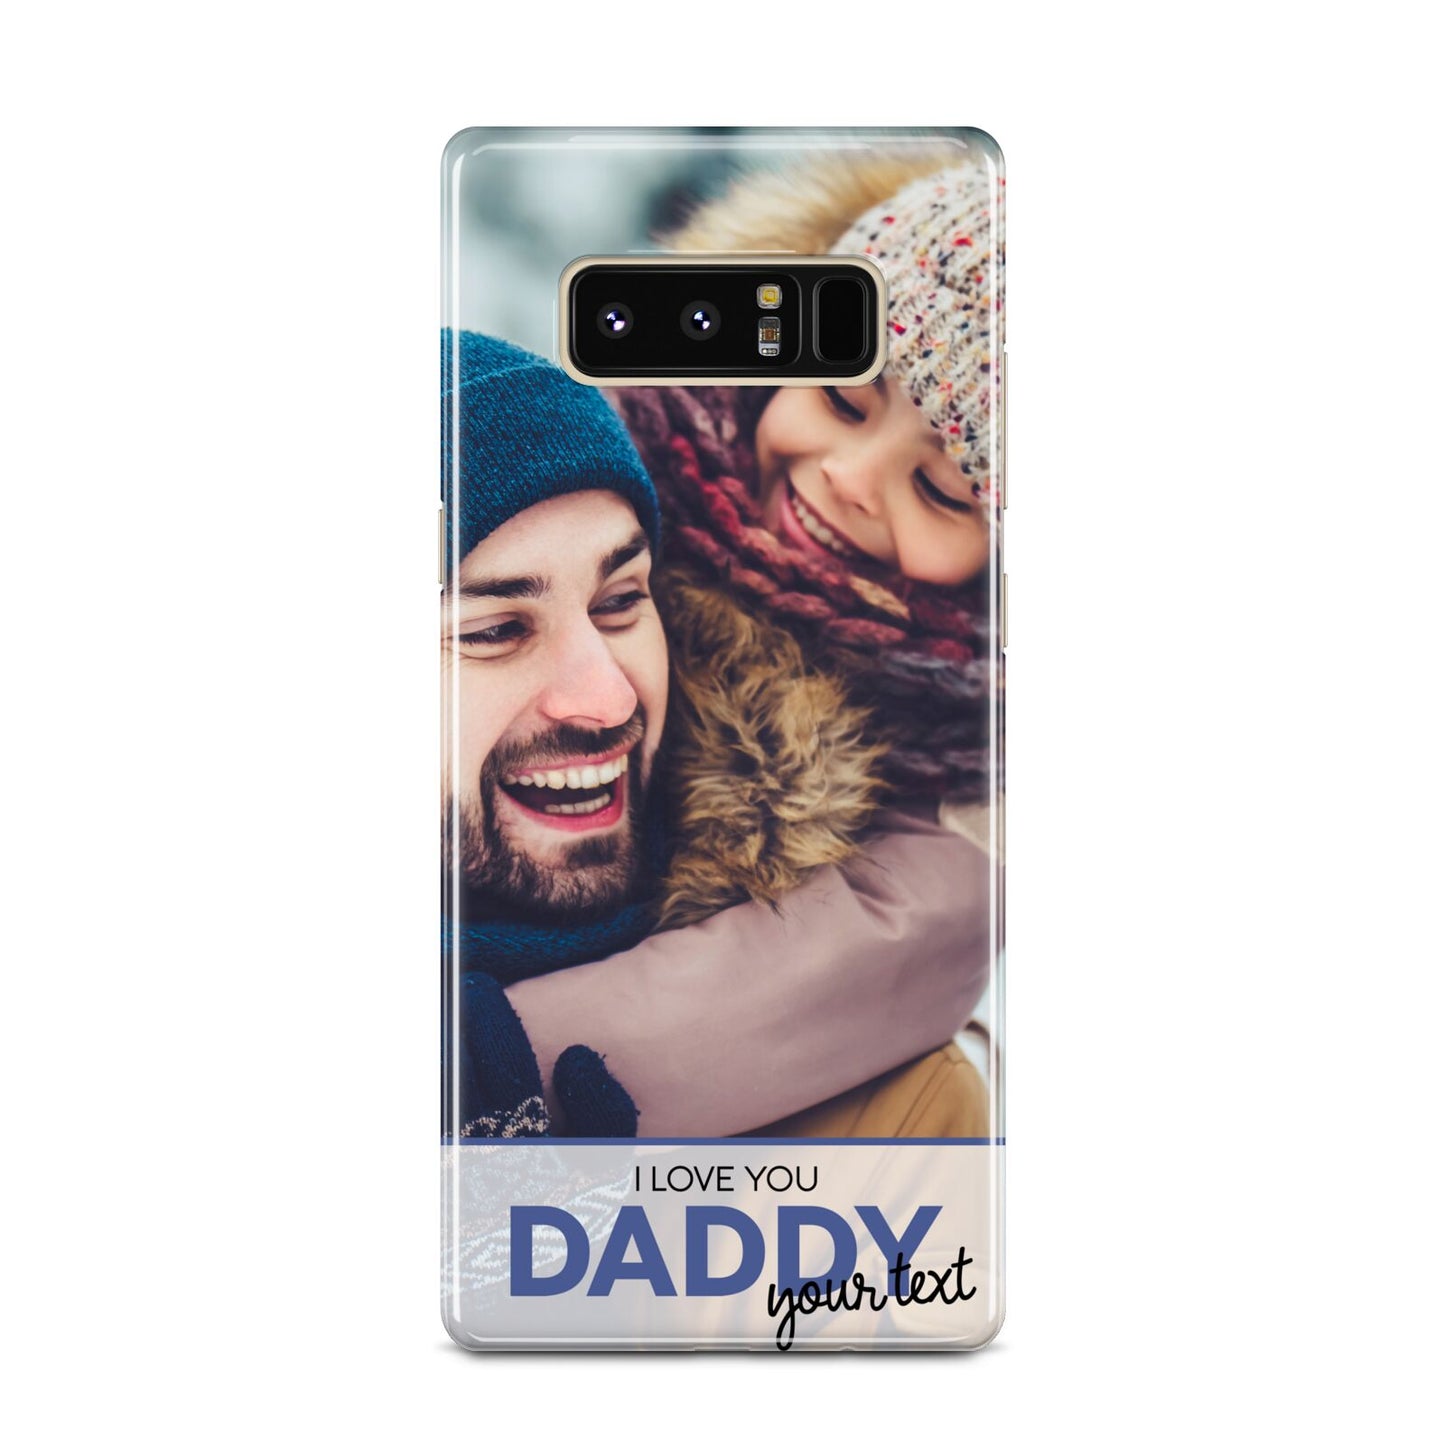 I Love You Daddy Personalised Photo Upload and Name Samsung Galaxy Note 8 Case